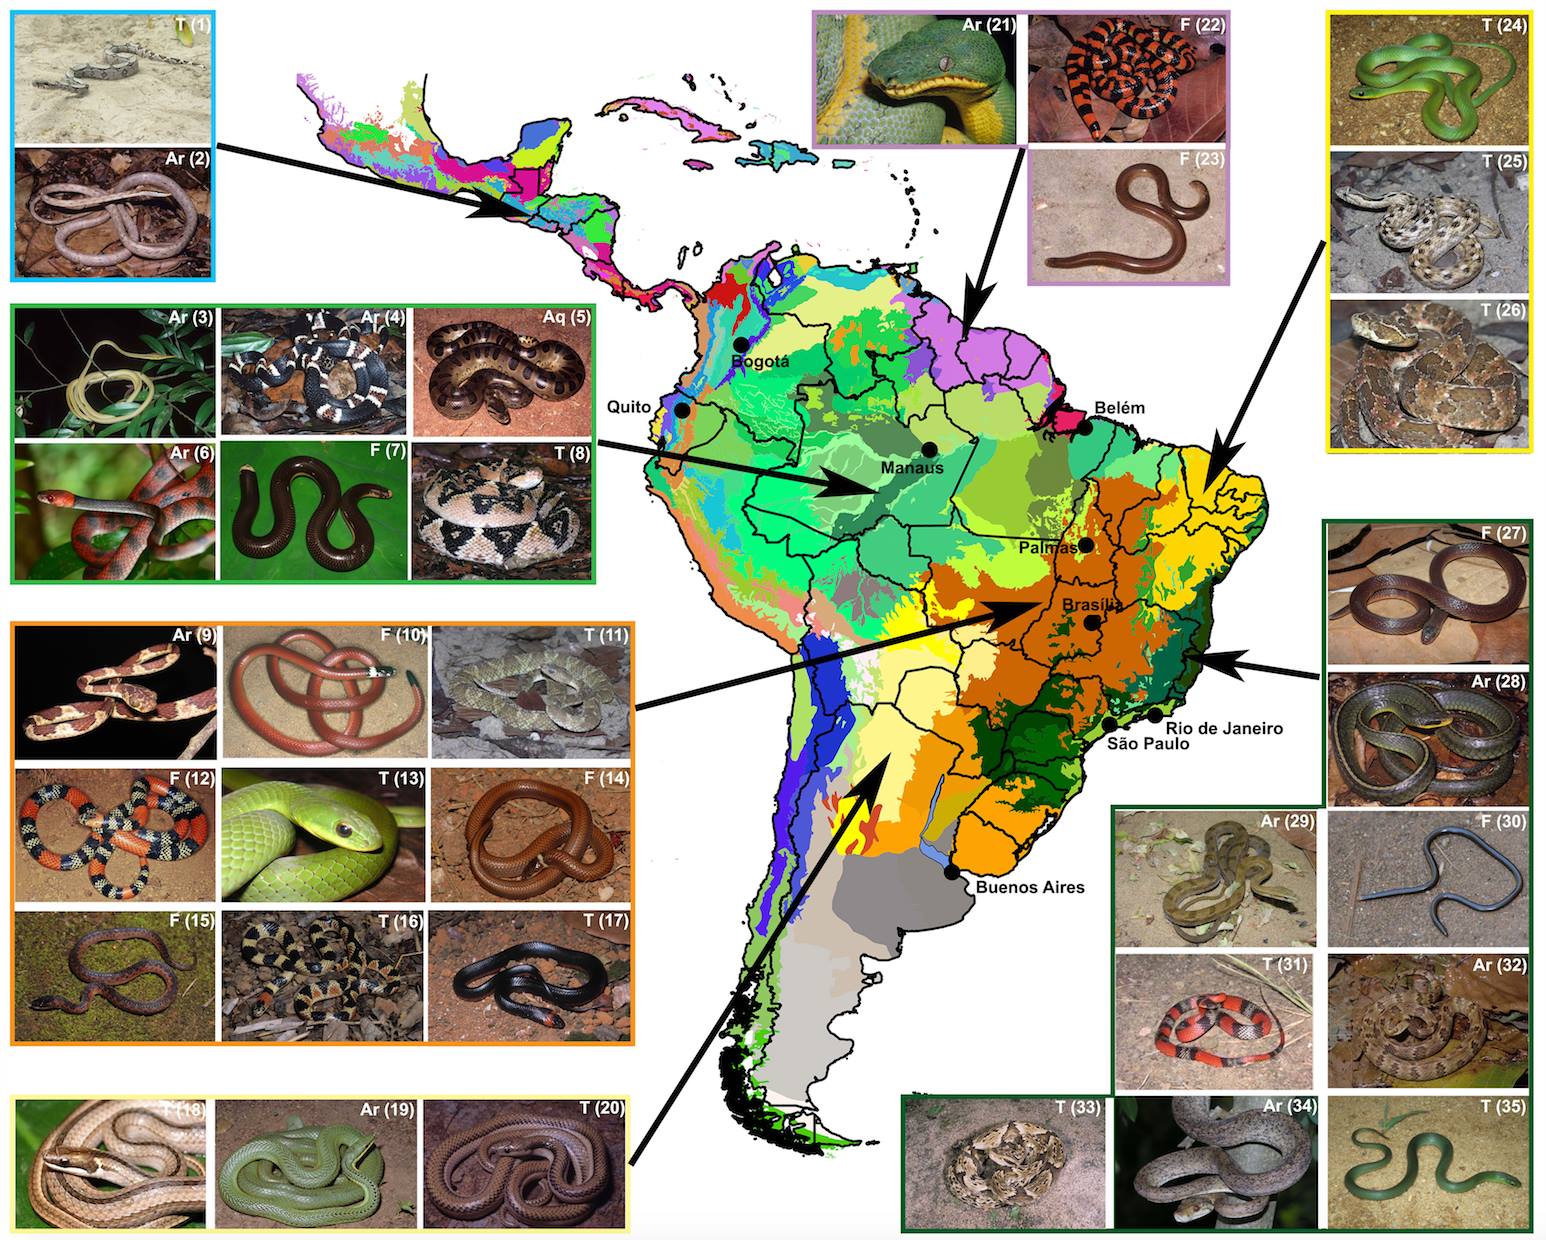 Species New to Science: [Herpetology • 2017] Patterns, Biases and